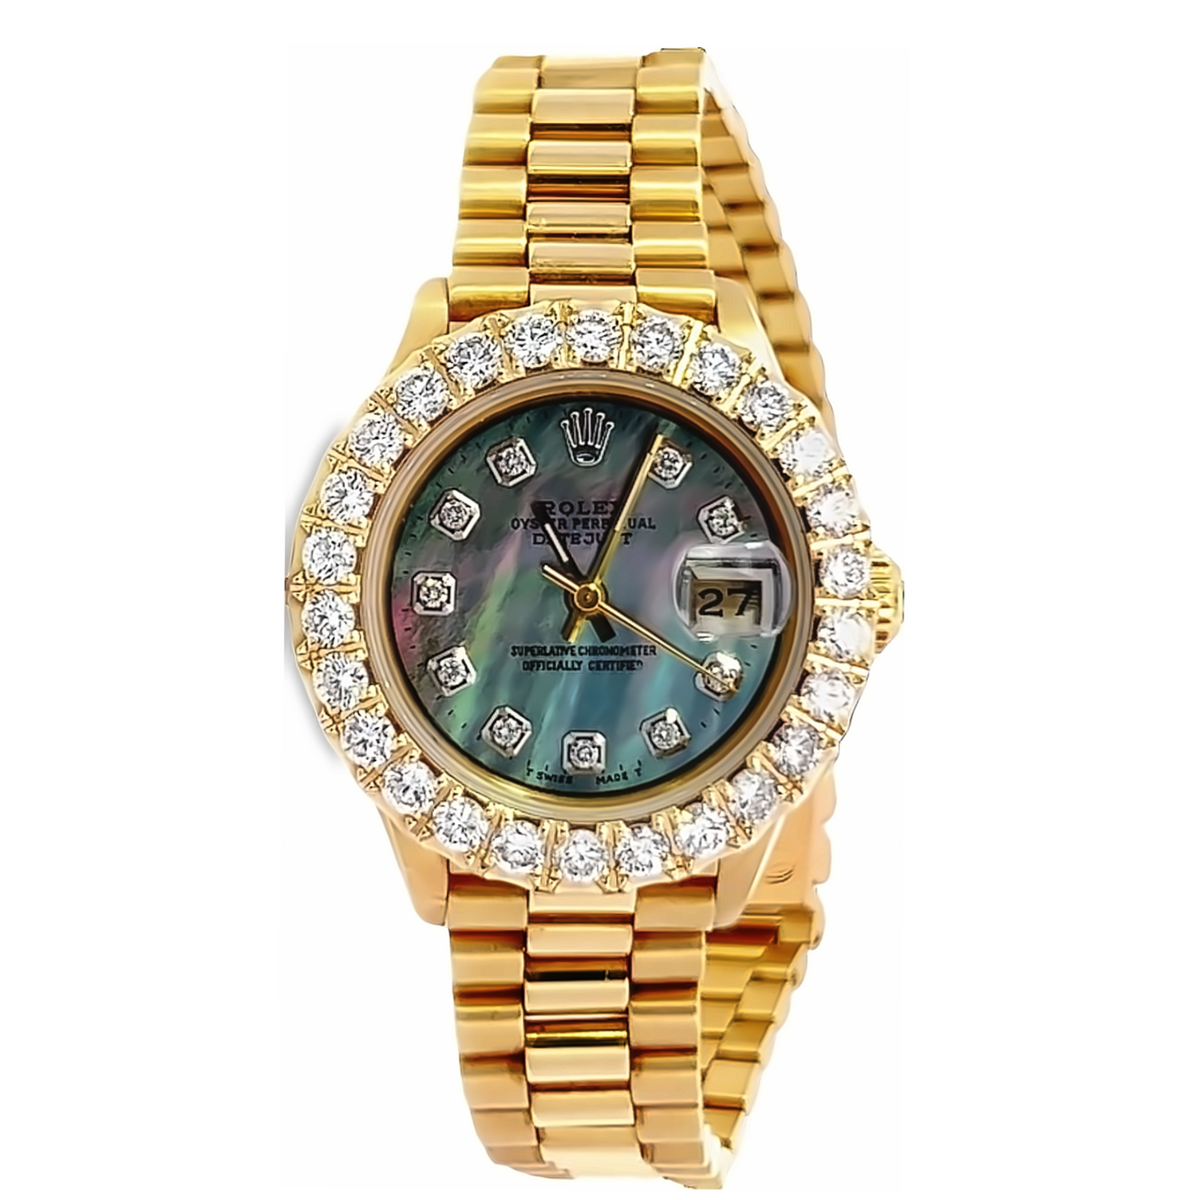 18K Yellow Gold Pre-Owned Rolex DateJust (Brand New Condition)